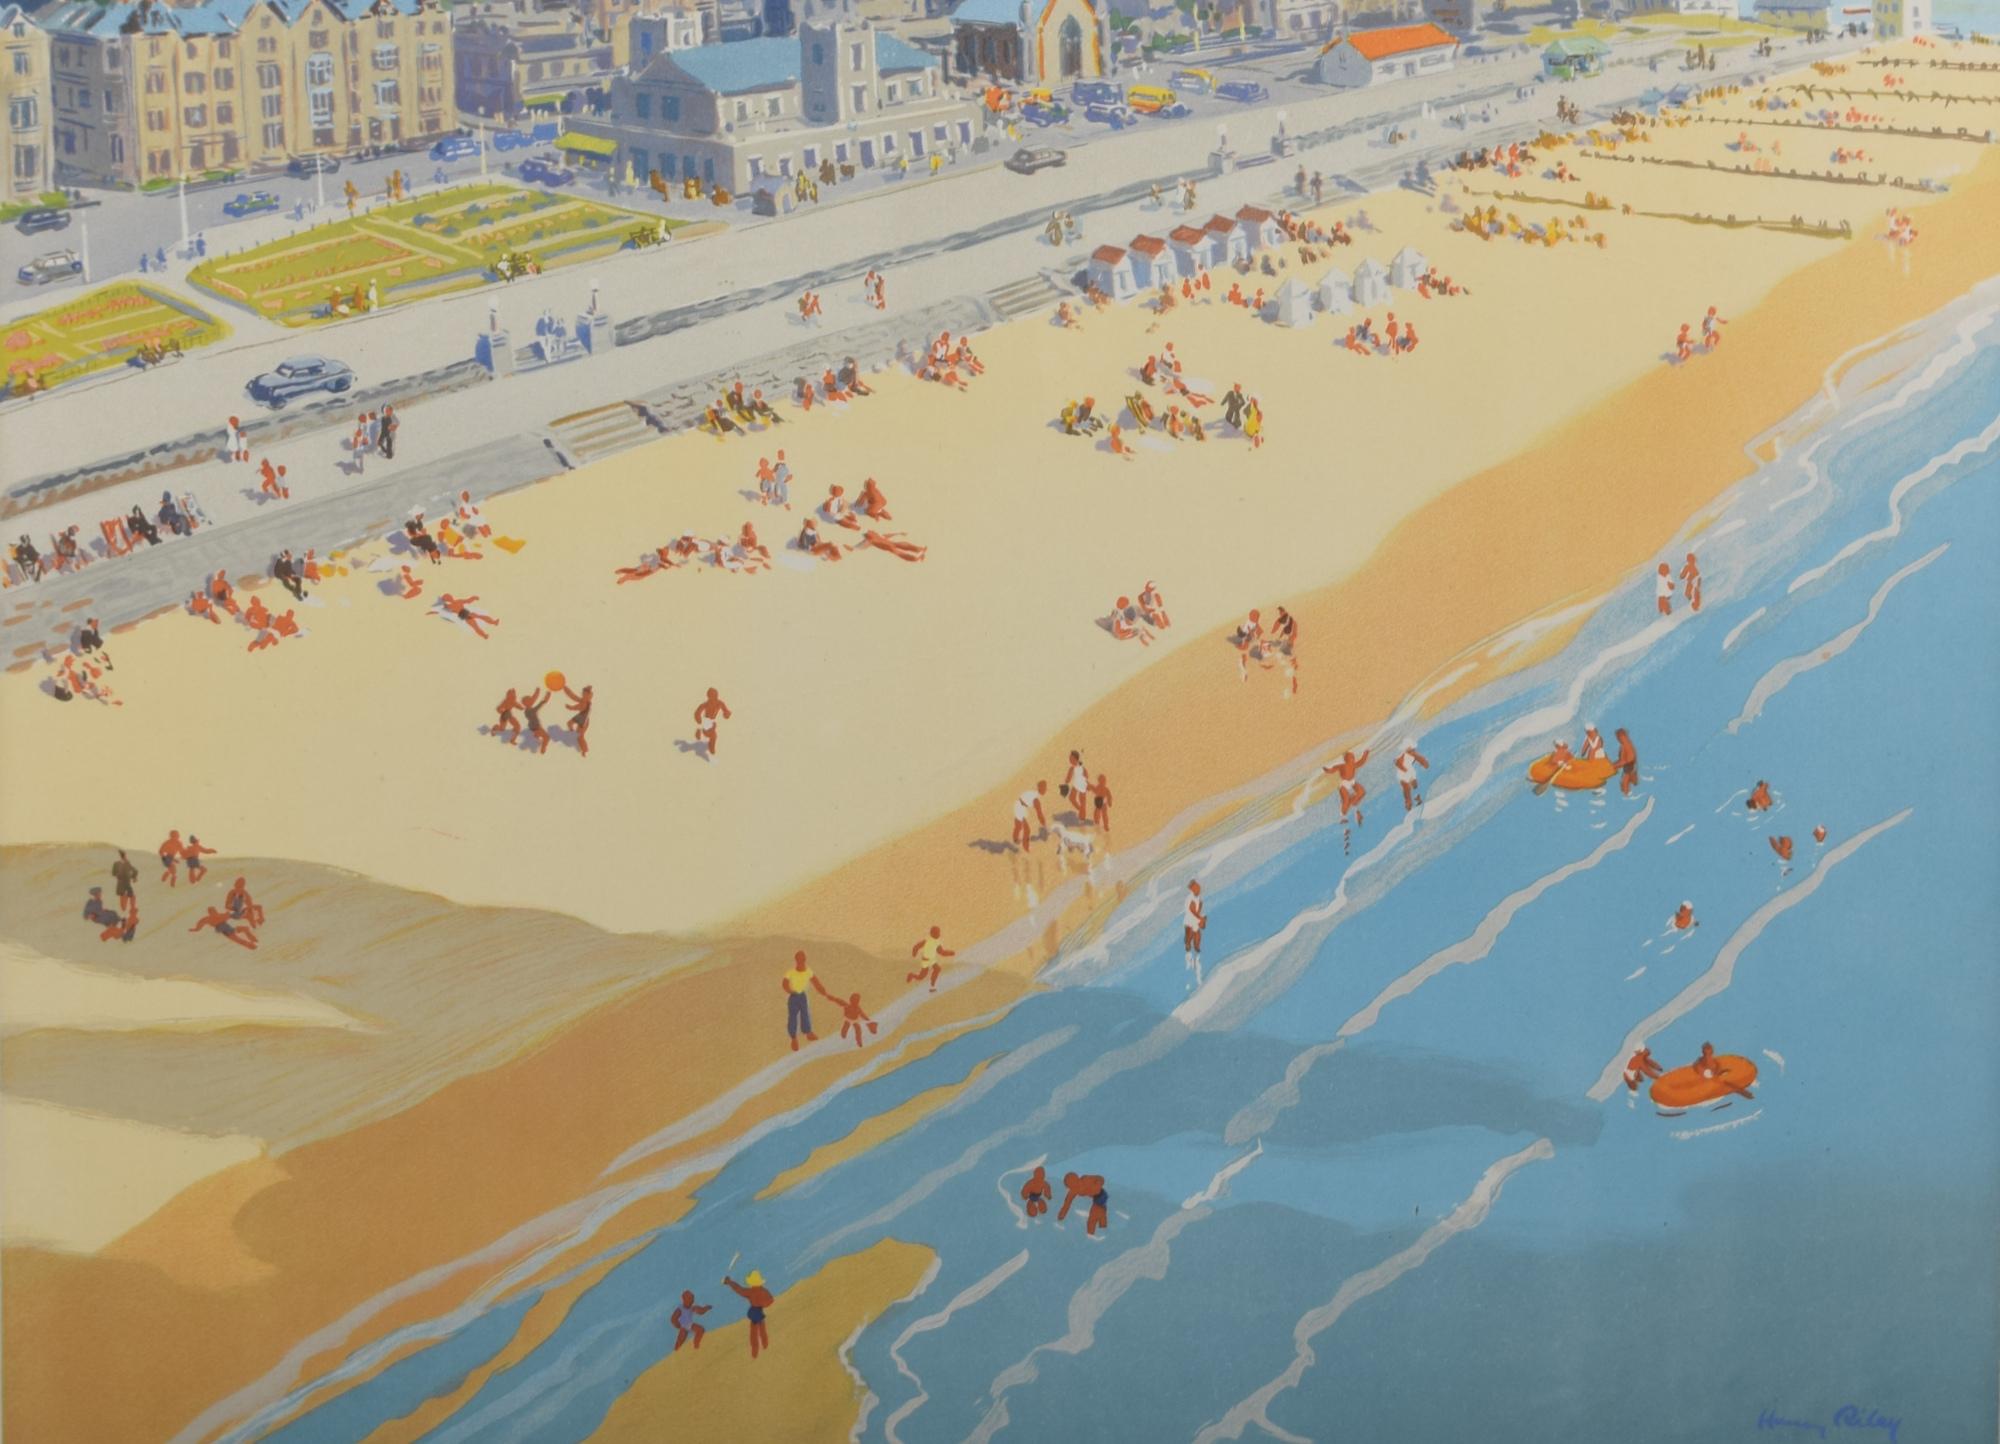 Barmouth, Wales British Railways poster by Harry Riley For Sale 4